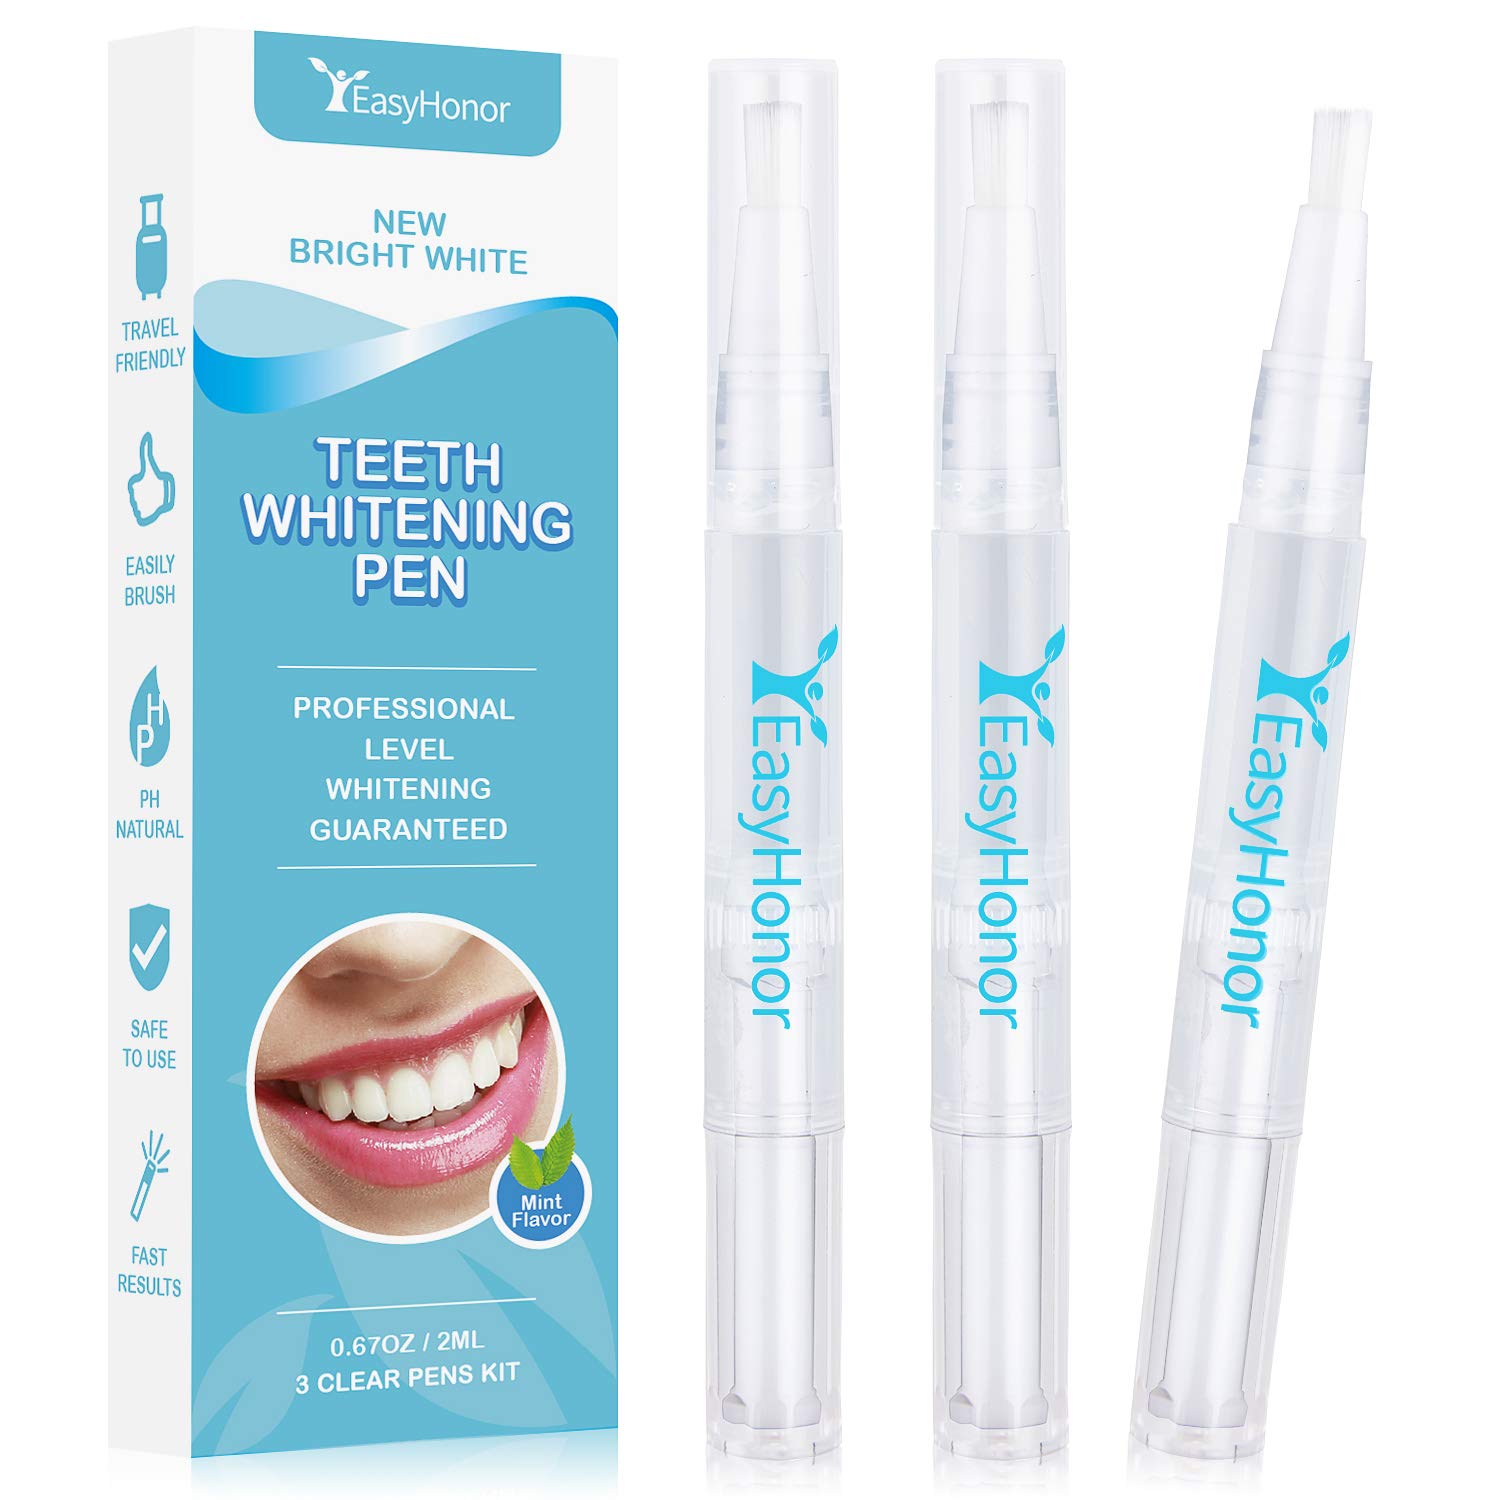 EasyHonor Teeth Whitening Pen Gel Dental - 3 PCS Clear Kit,35% Carbamide Peroxide Gel, Safe and Effective for Teeth Whitening, Travel-Friendly, Easy to Use, Natural Mint Flavor